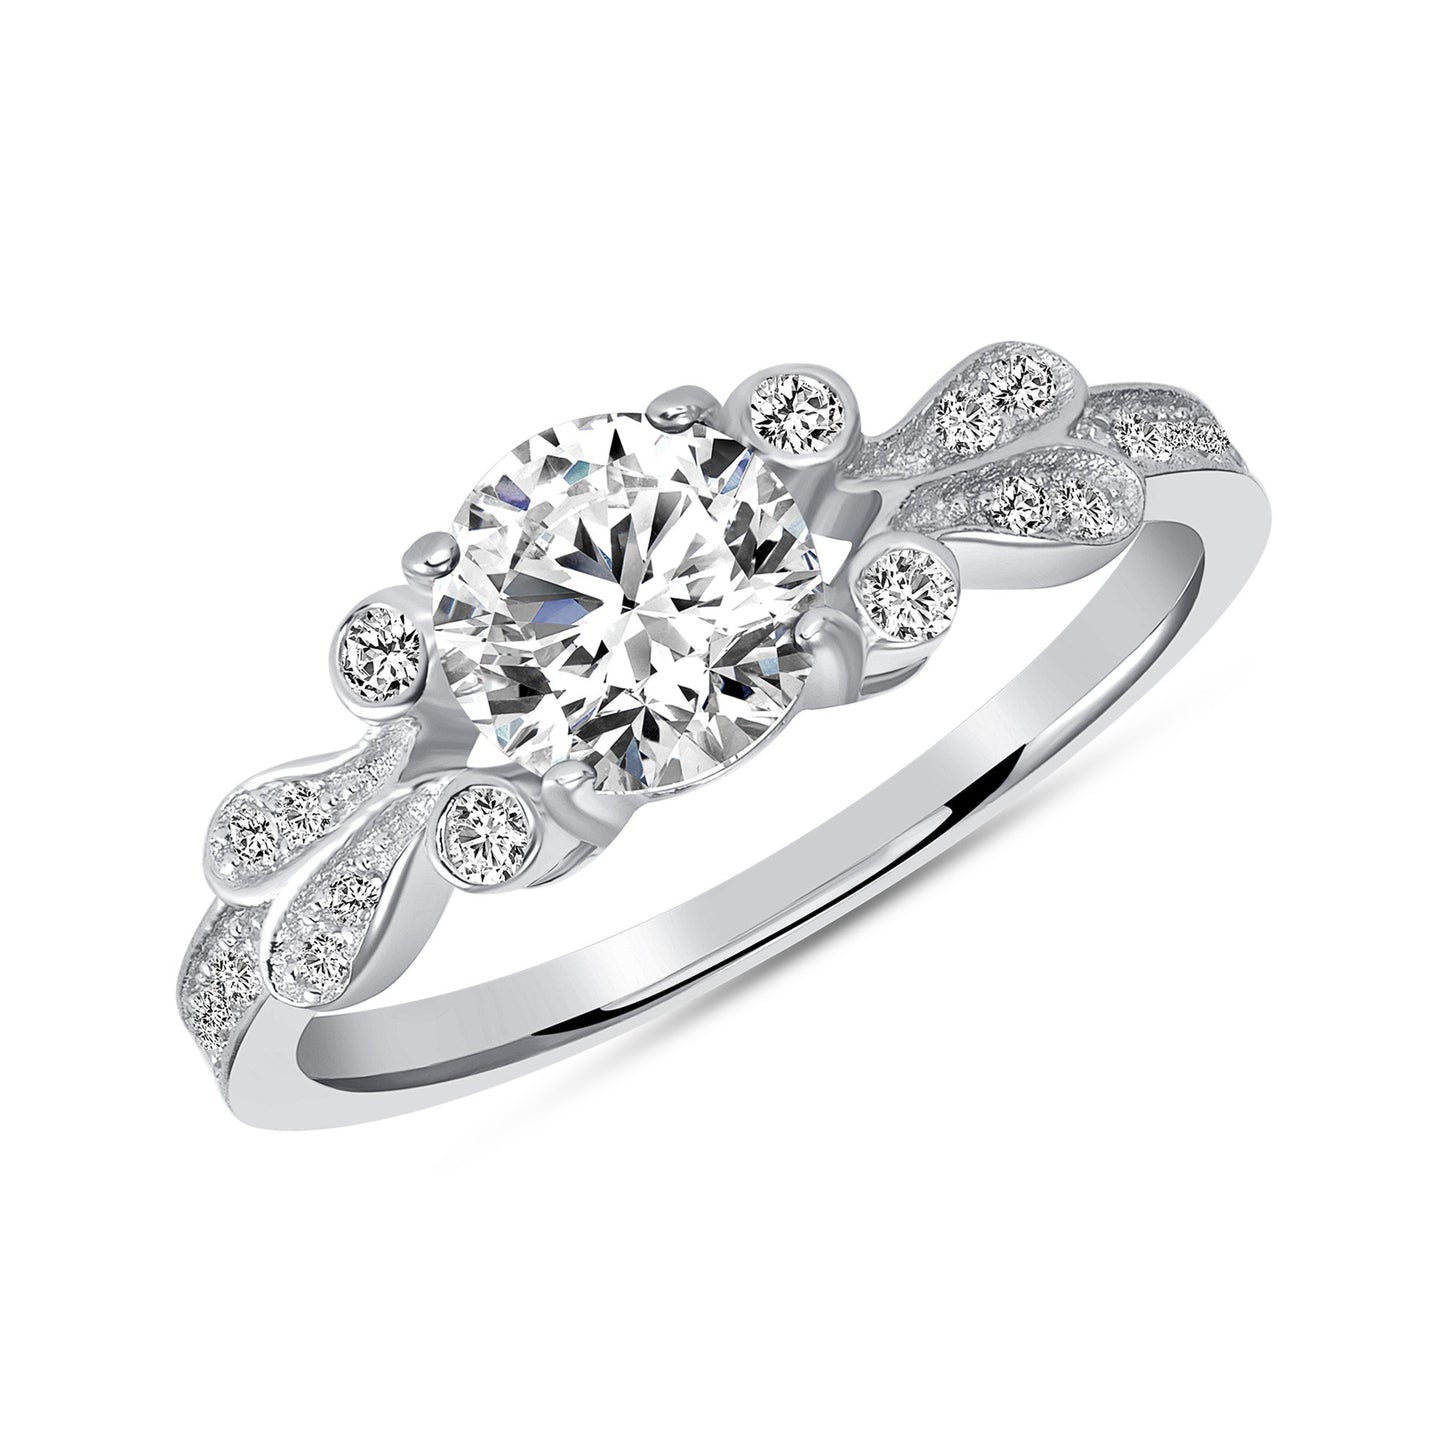 Silver 925 Rhodium Plated Round Clear Cubic Zirconia Solitaire Ring. DGR1673CLR